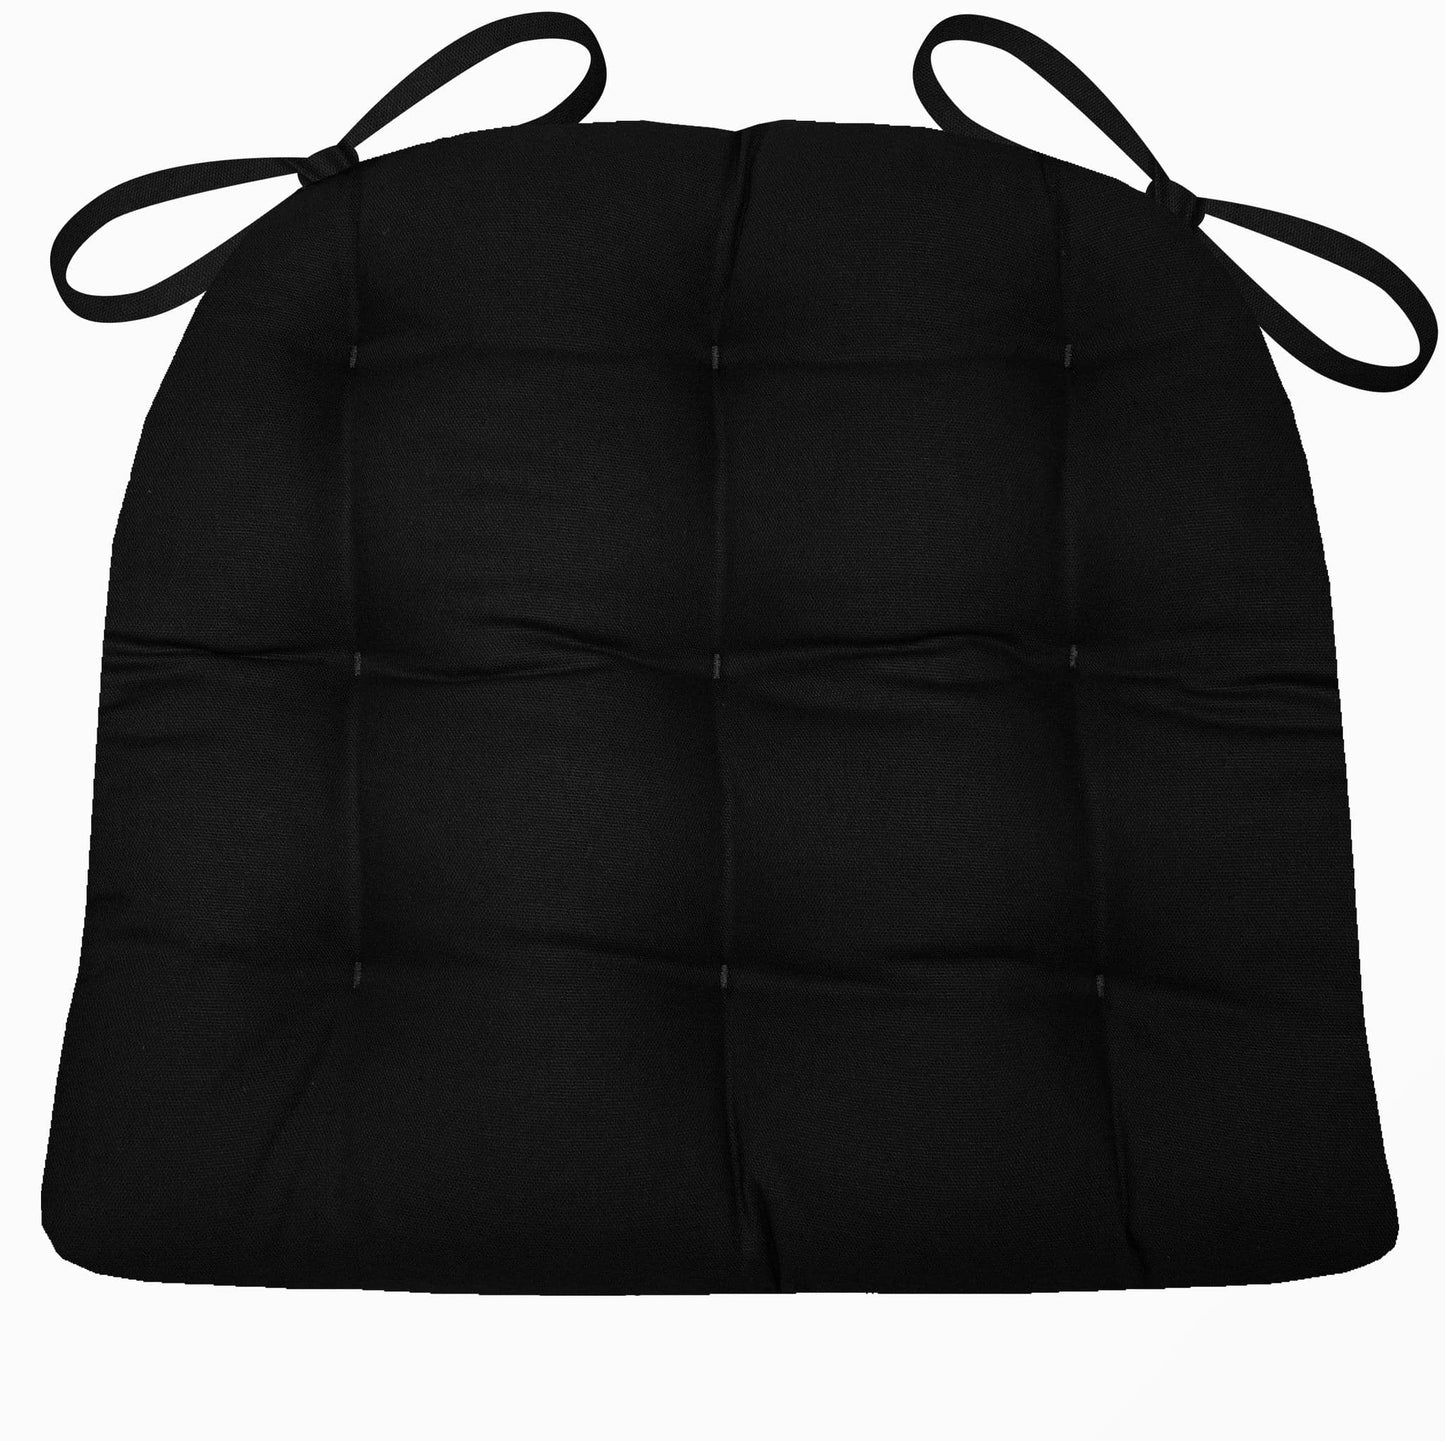 Woodlands Forest Floor Chair Cushion Reverse to Microsuede Black